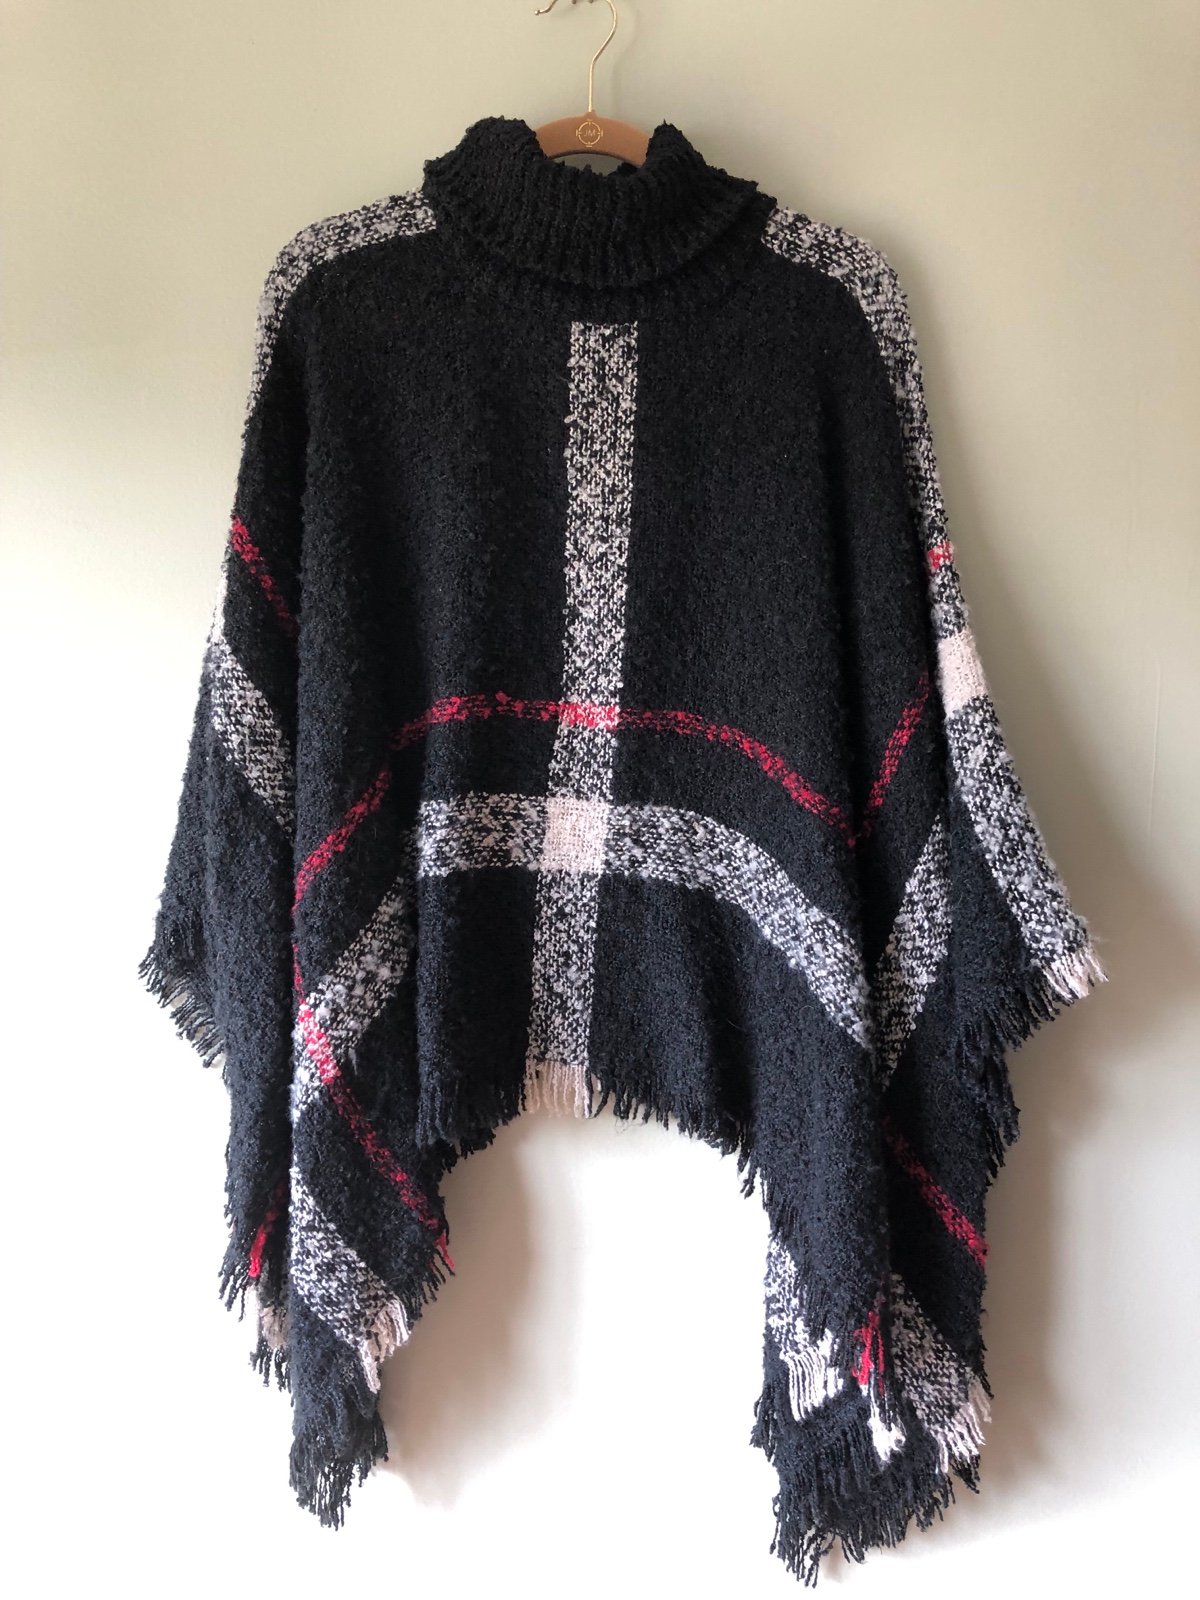 Simple Black, Red and White Knitted Plaid Turtleneck Poncho with Fringe j2kL8mxVB Store Online